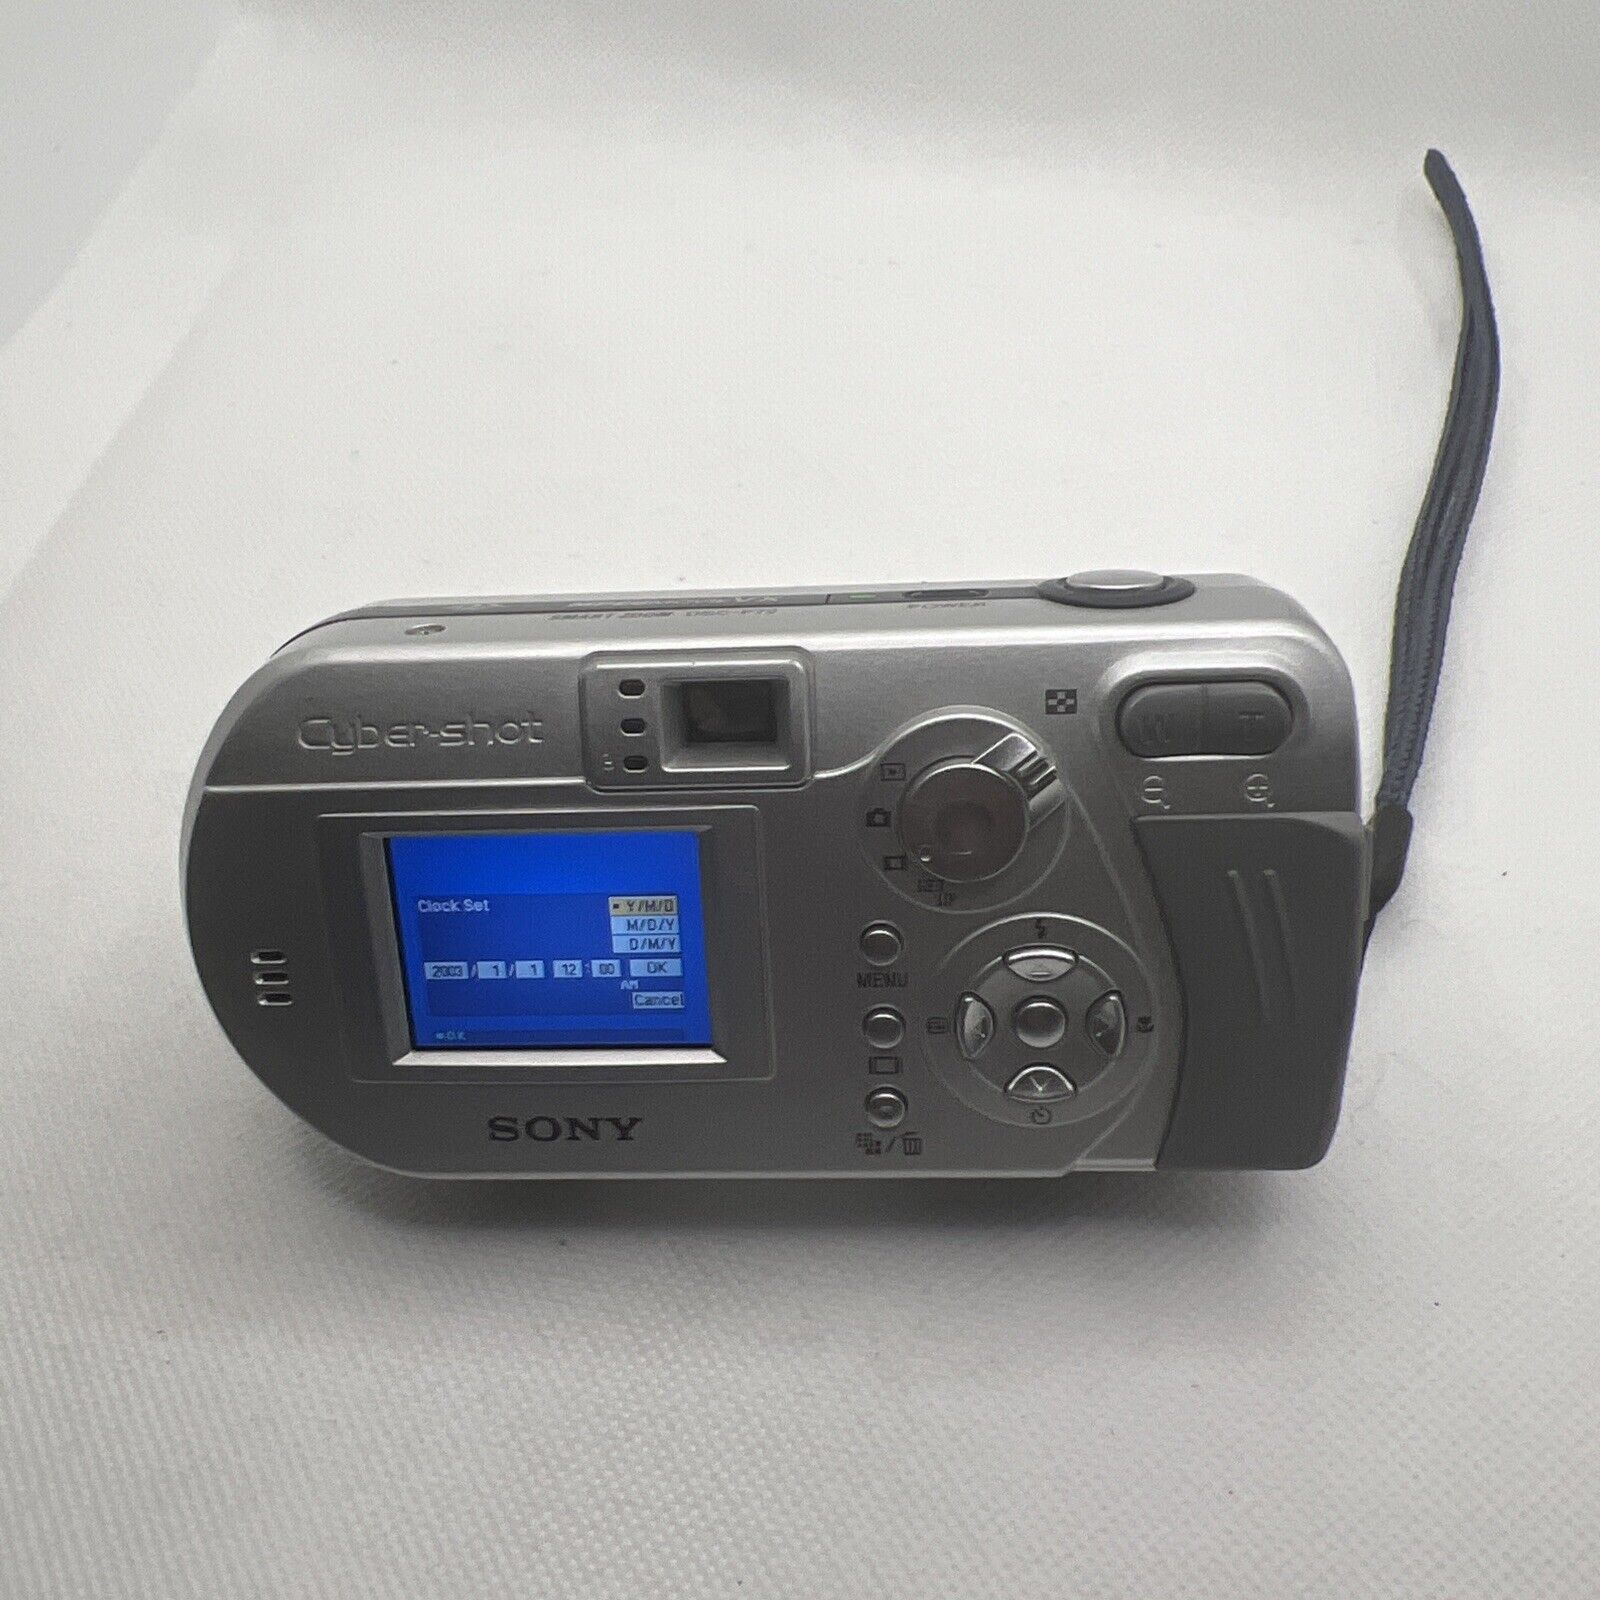 Sony Cyber-shot DSC-P72 3.2MP Digital Camera + Memory, Batteries & Cable Tested Sony